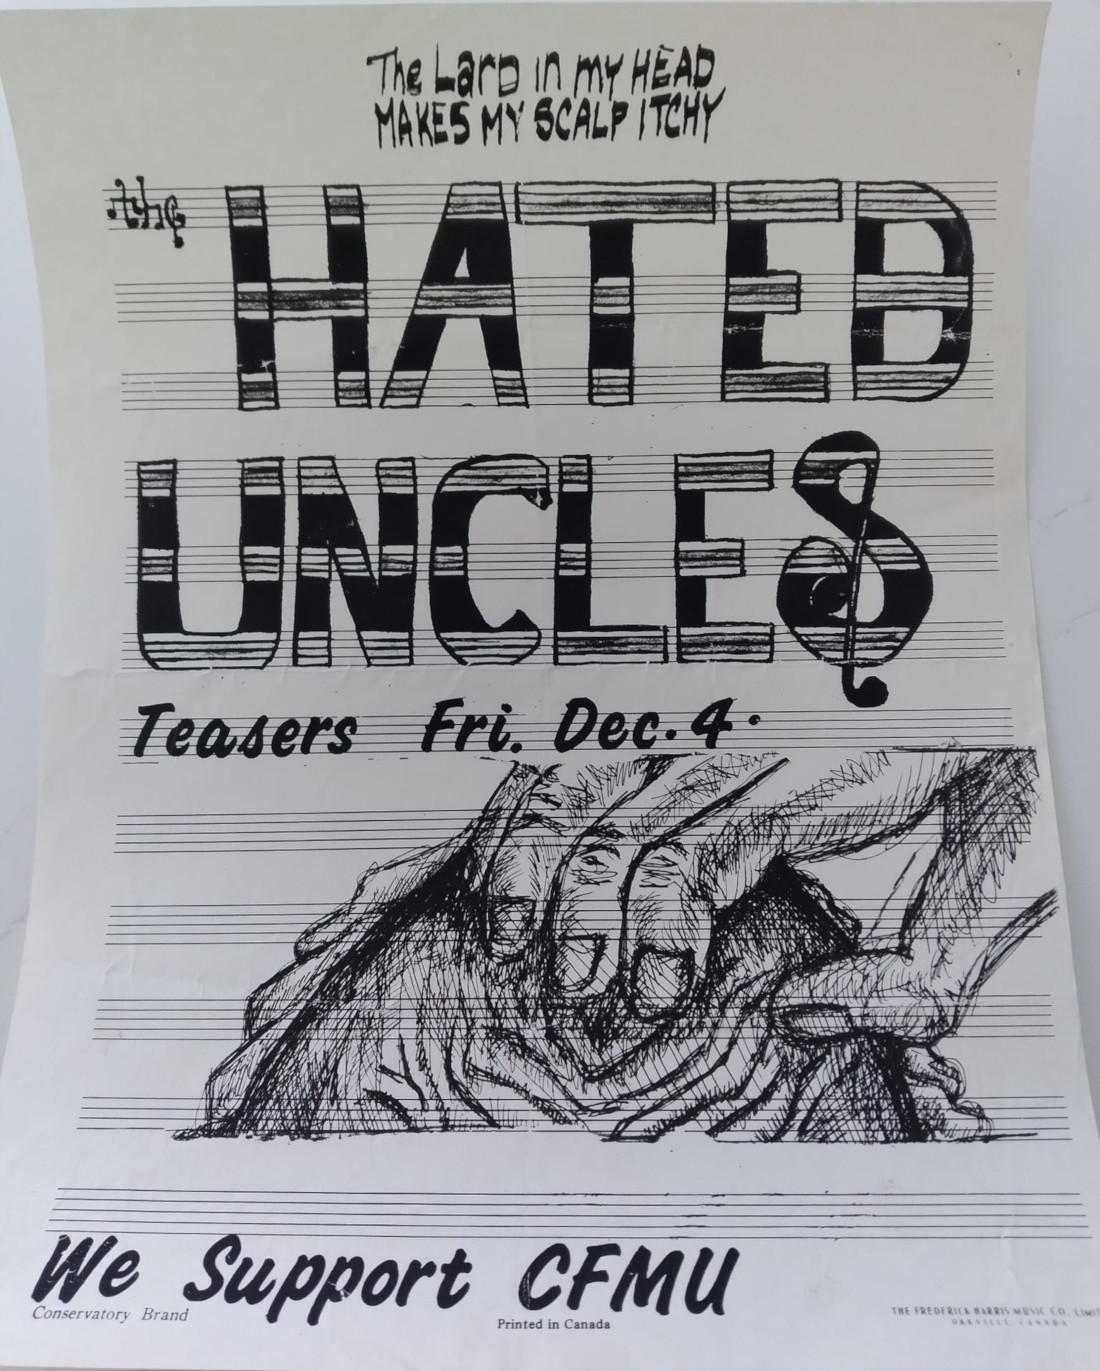 Poster for Hated Uncles Teasers show December 4th, 1987